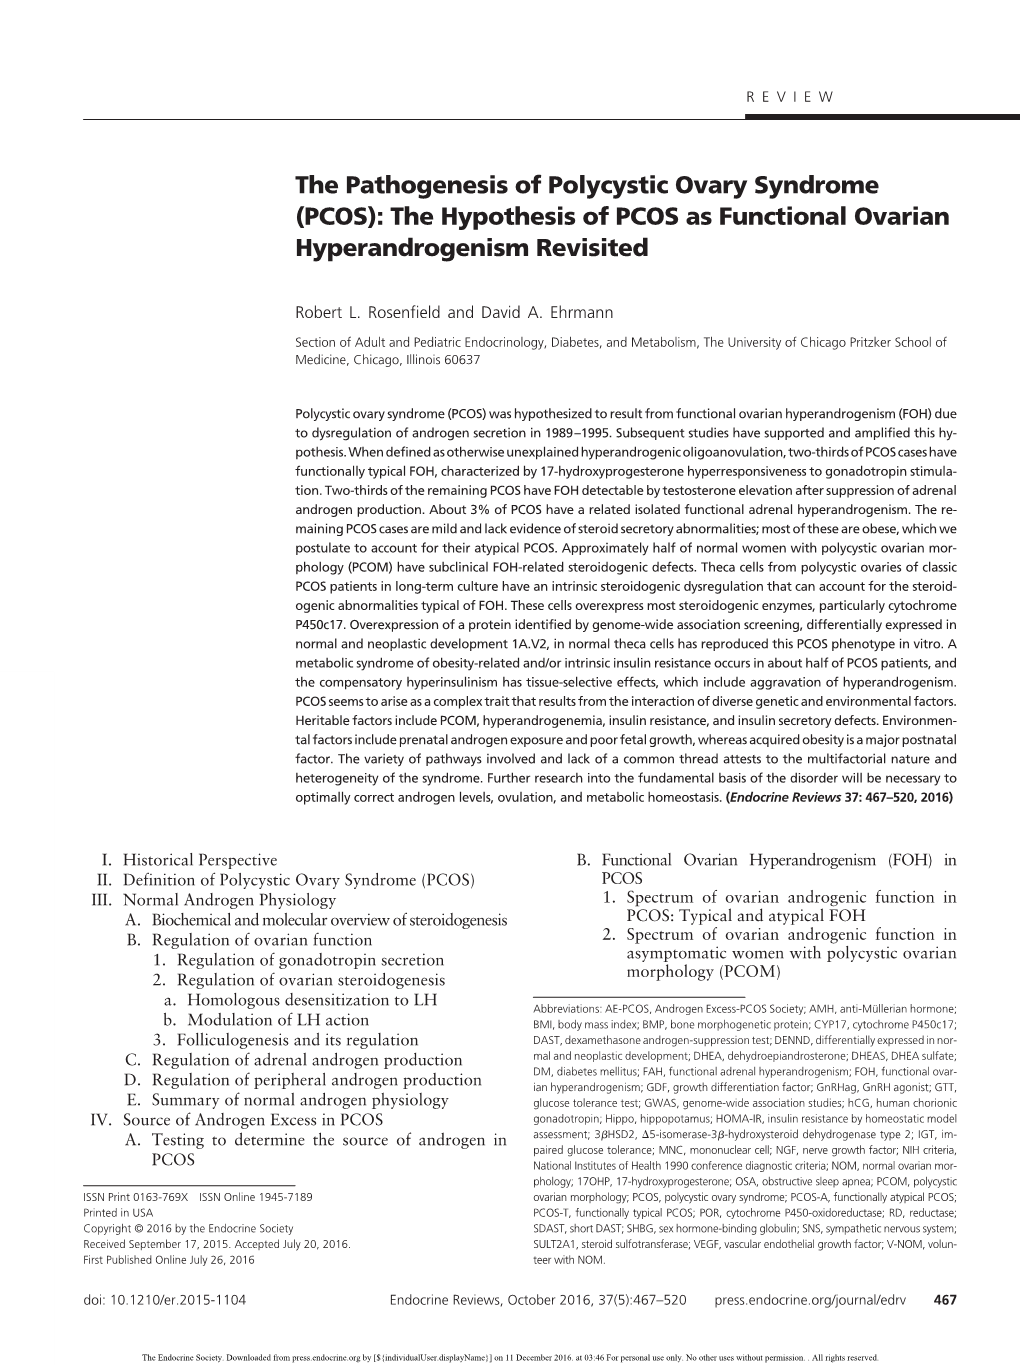 The Pathogenesis of Polycystic Ovary Syndrome (PCOS): the Hypothesis of PCOS As Functional Ovarian Hyperandrogenism Revisited